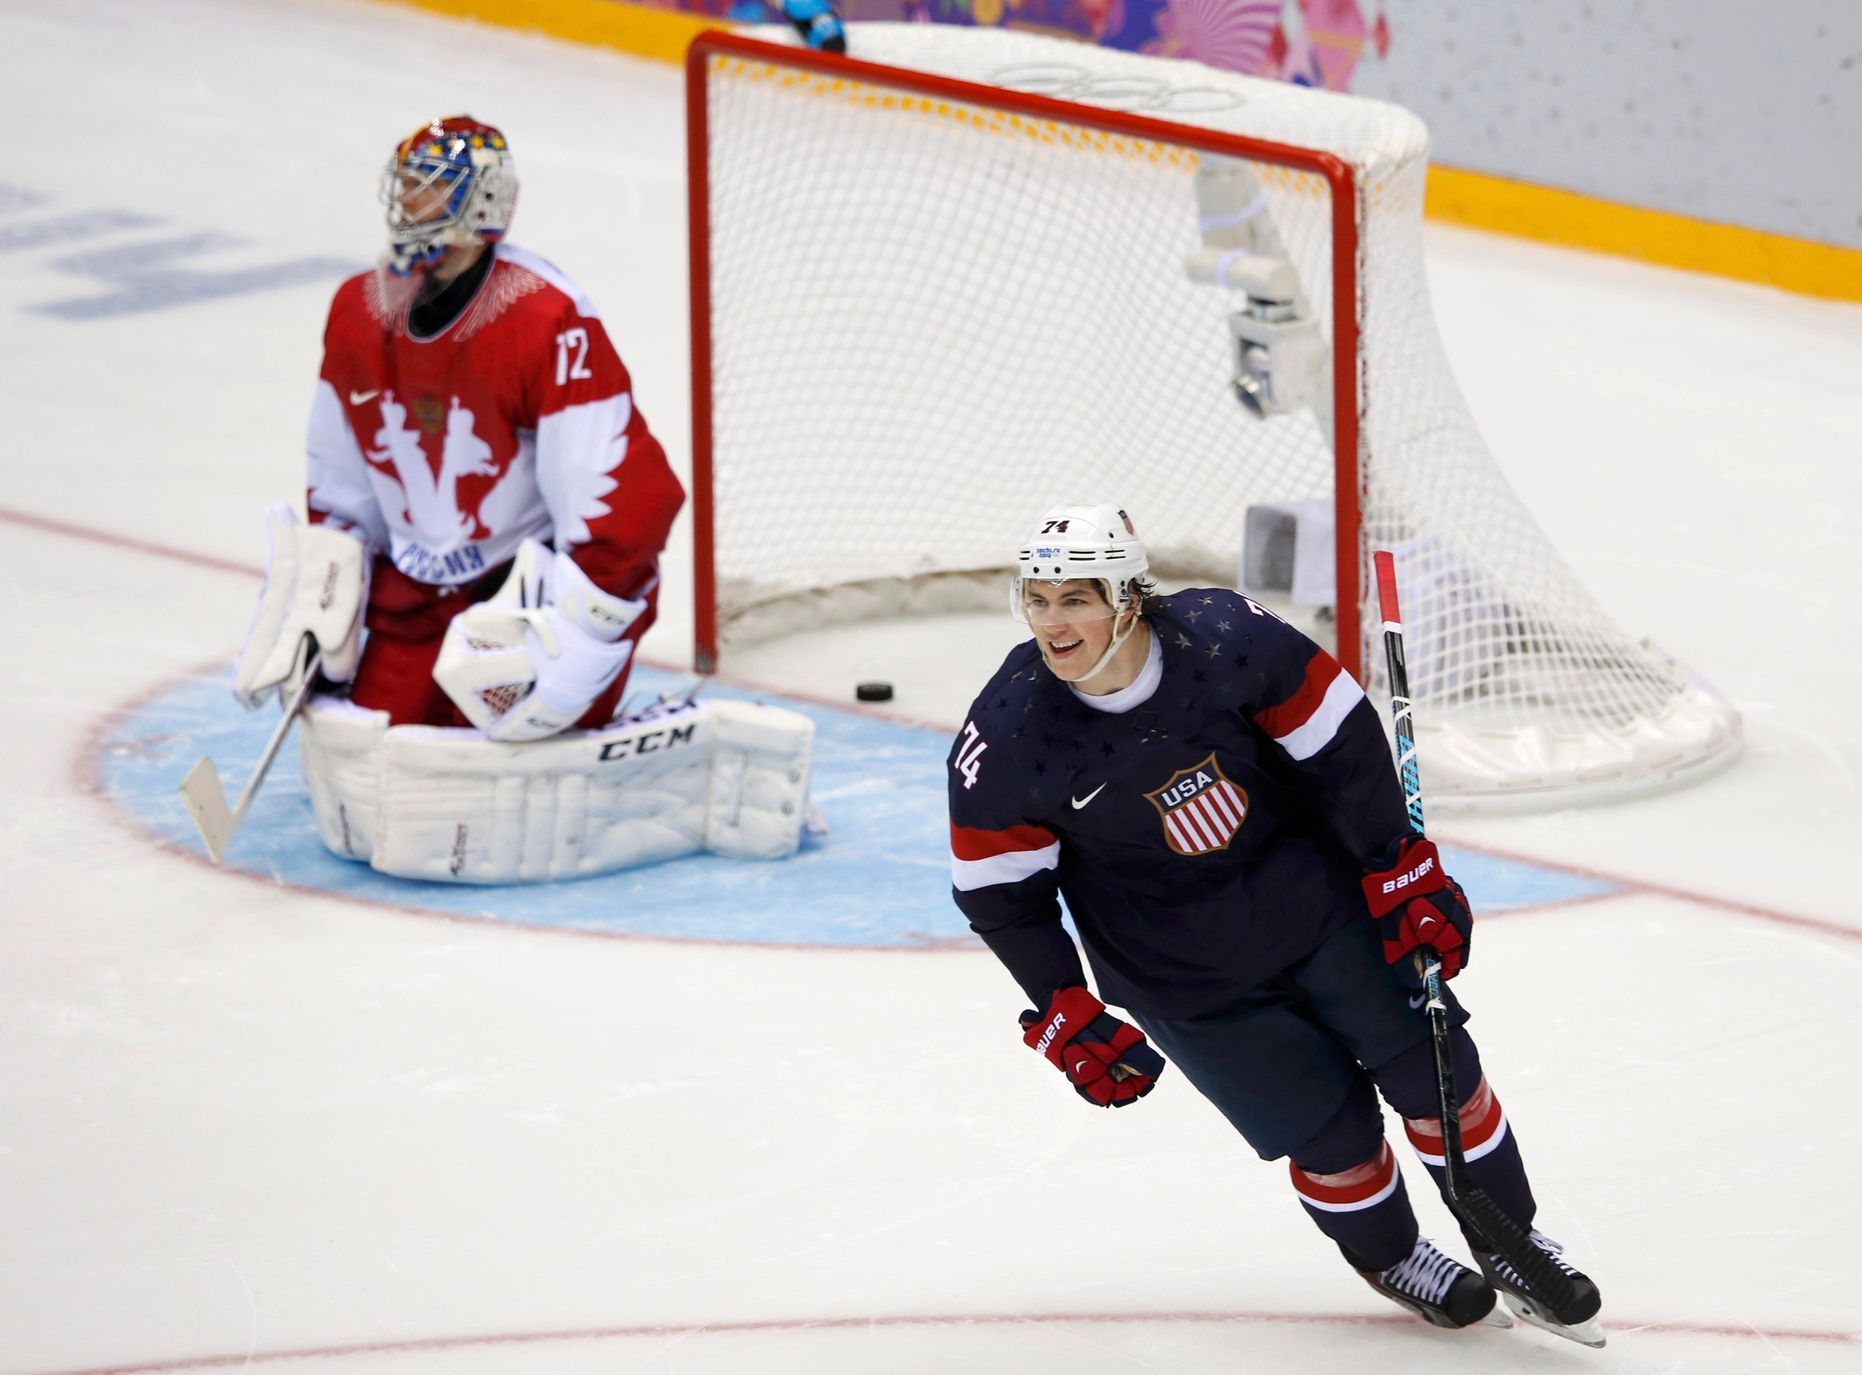 Team USA's Oshie reacts after scoring the game-winning shootout goal against Russia's goalie Bobrovski during their men's preliminary round ice hockey game at the 2014 Sochi Winter Olympics